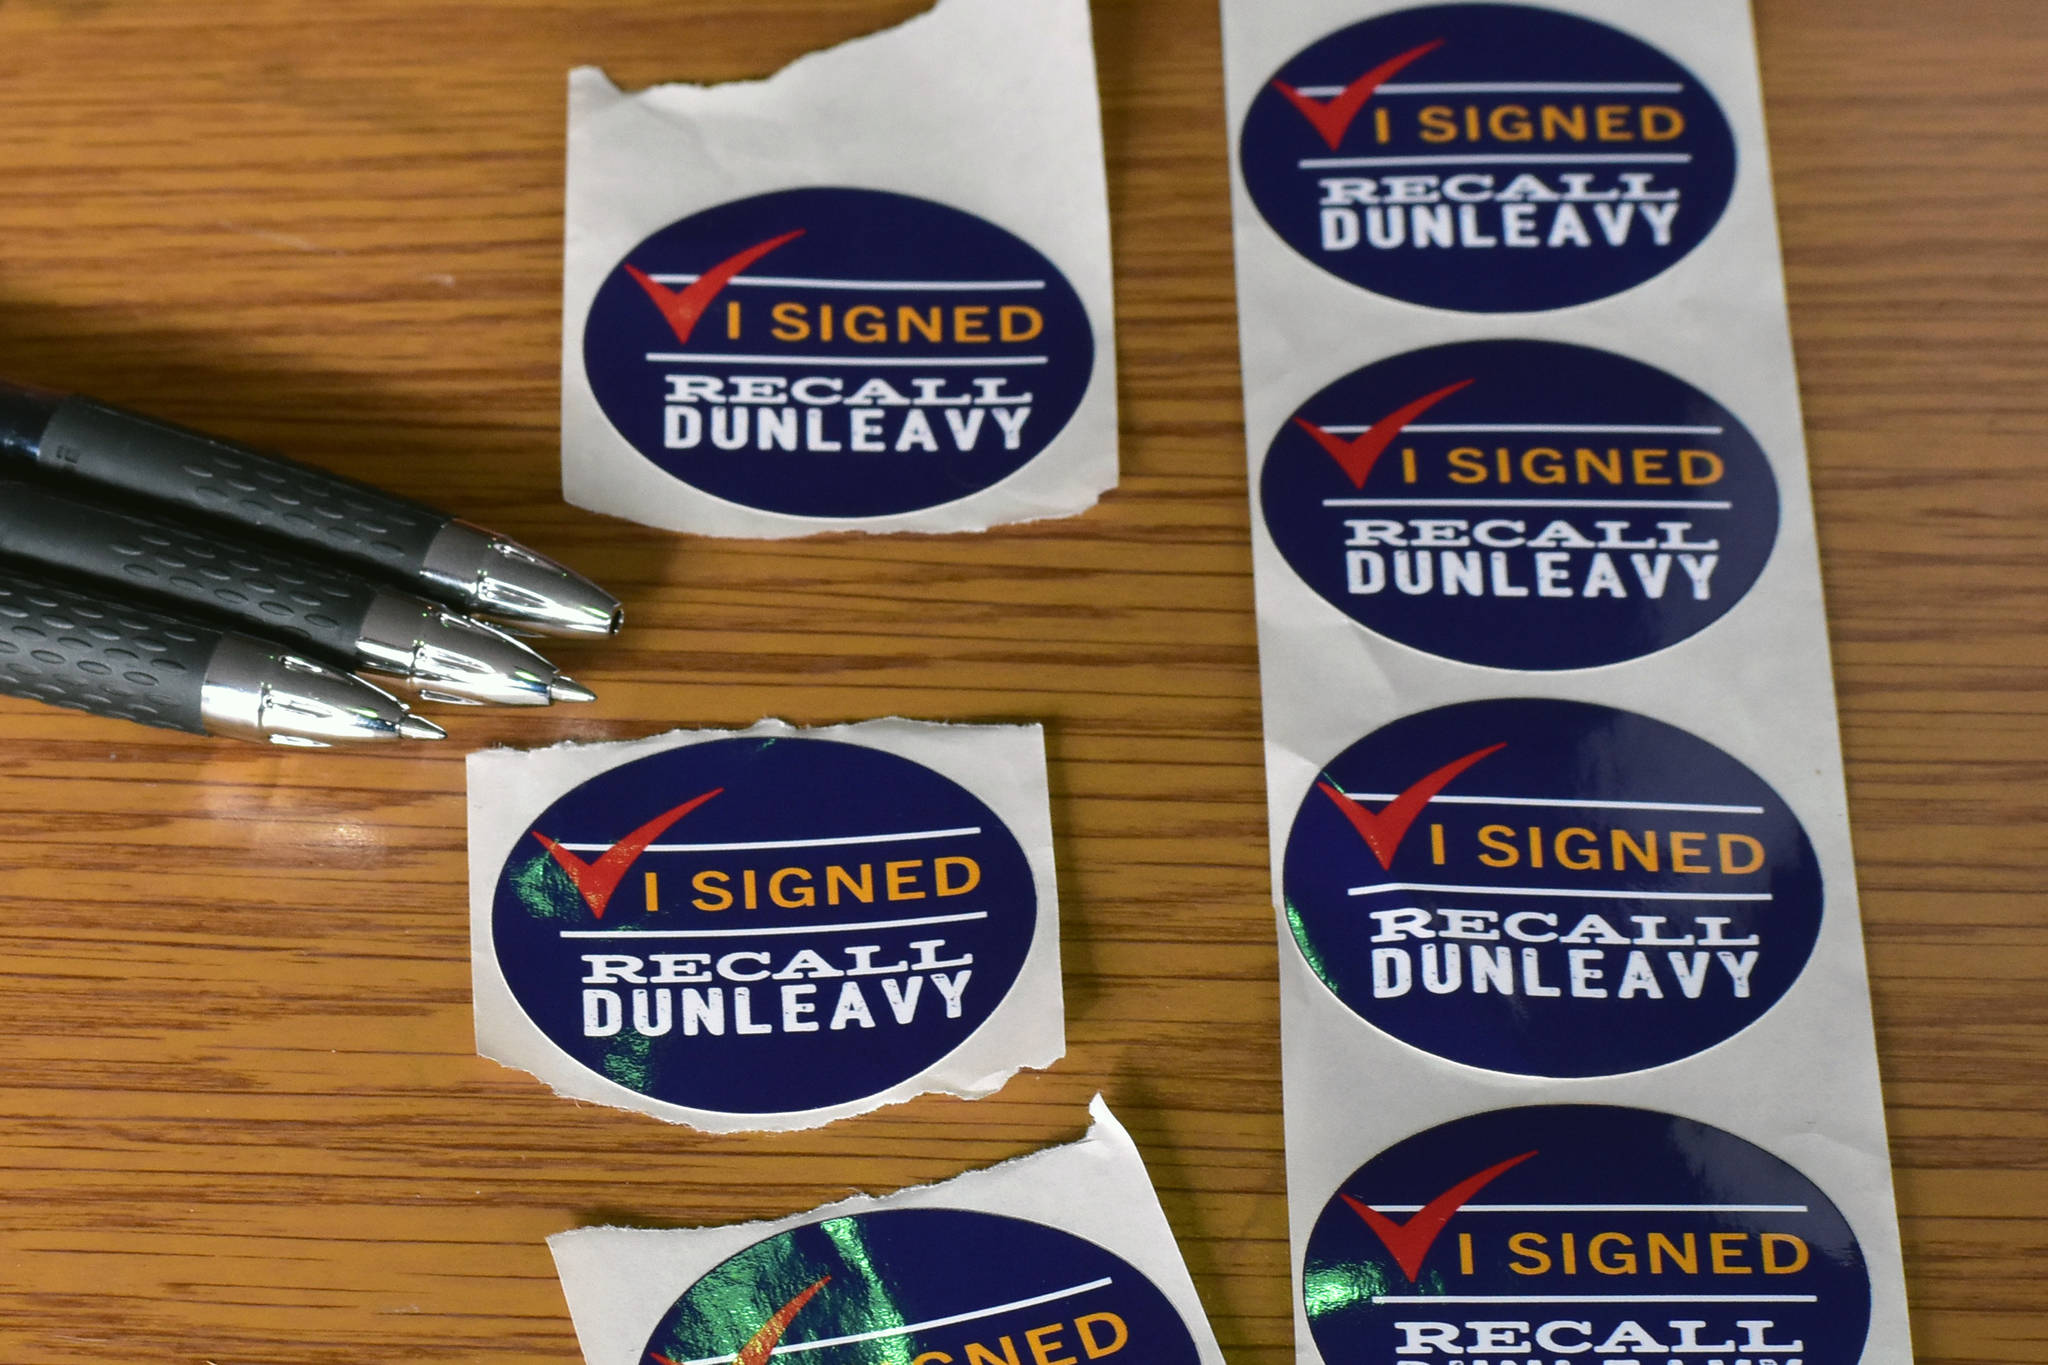 Juneauites gathered signatures to recall Gov. Mike Dunleavy in late February. The campaign is now collected signatures through the mail. (Peter Segall | Juneau Empire File)